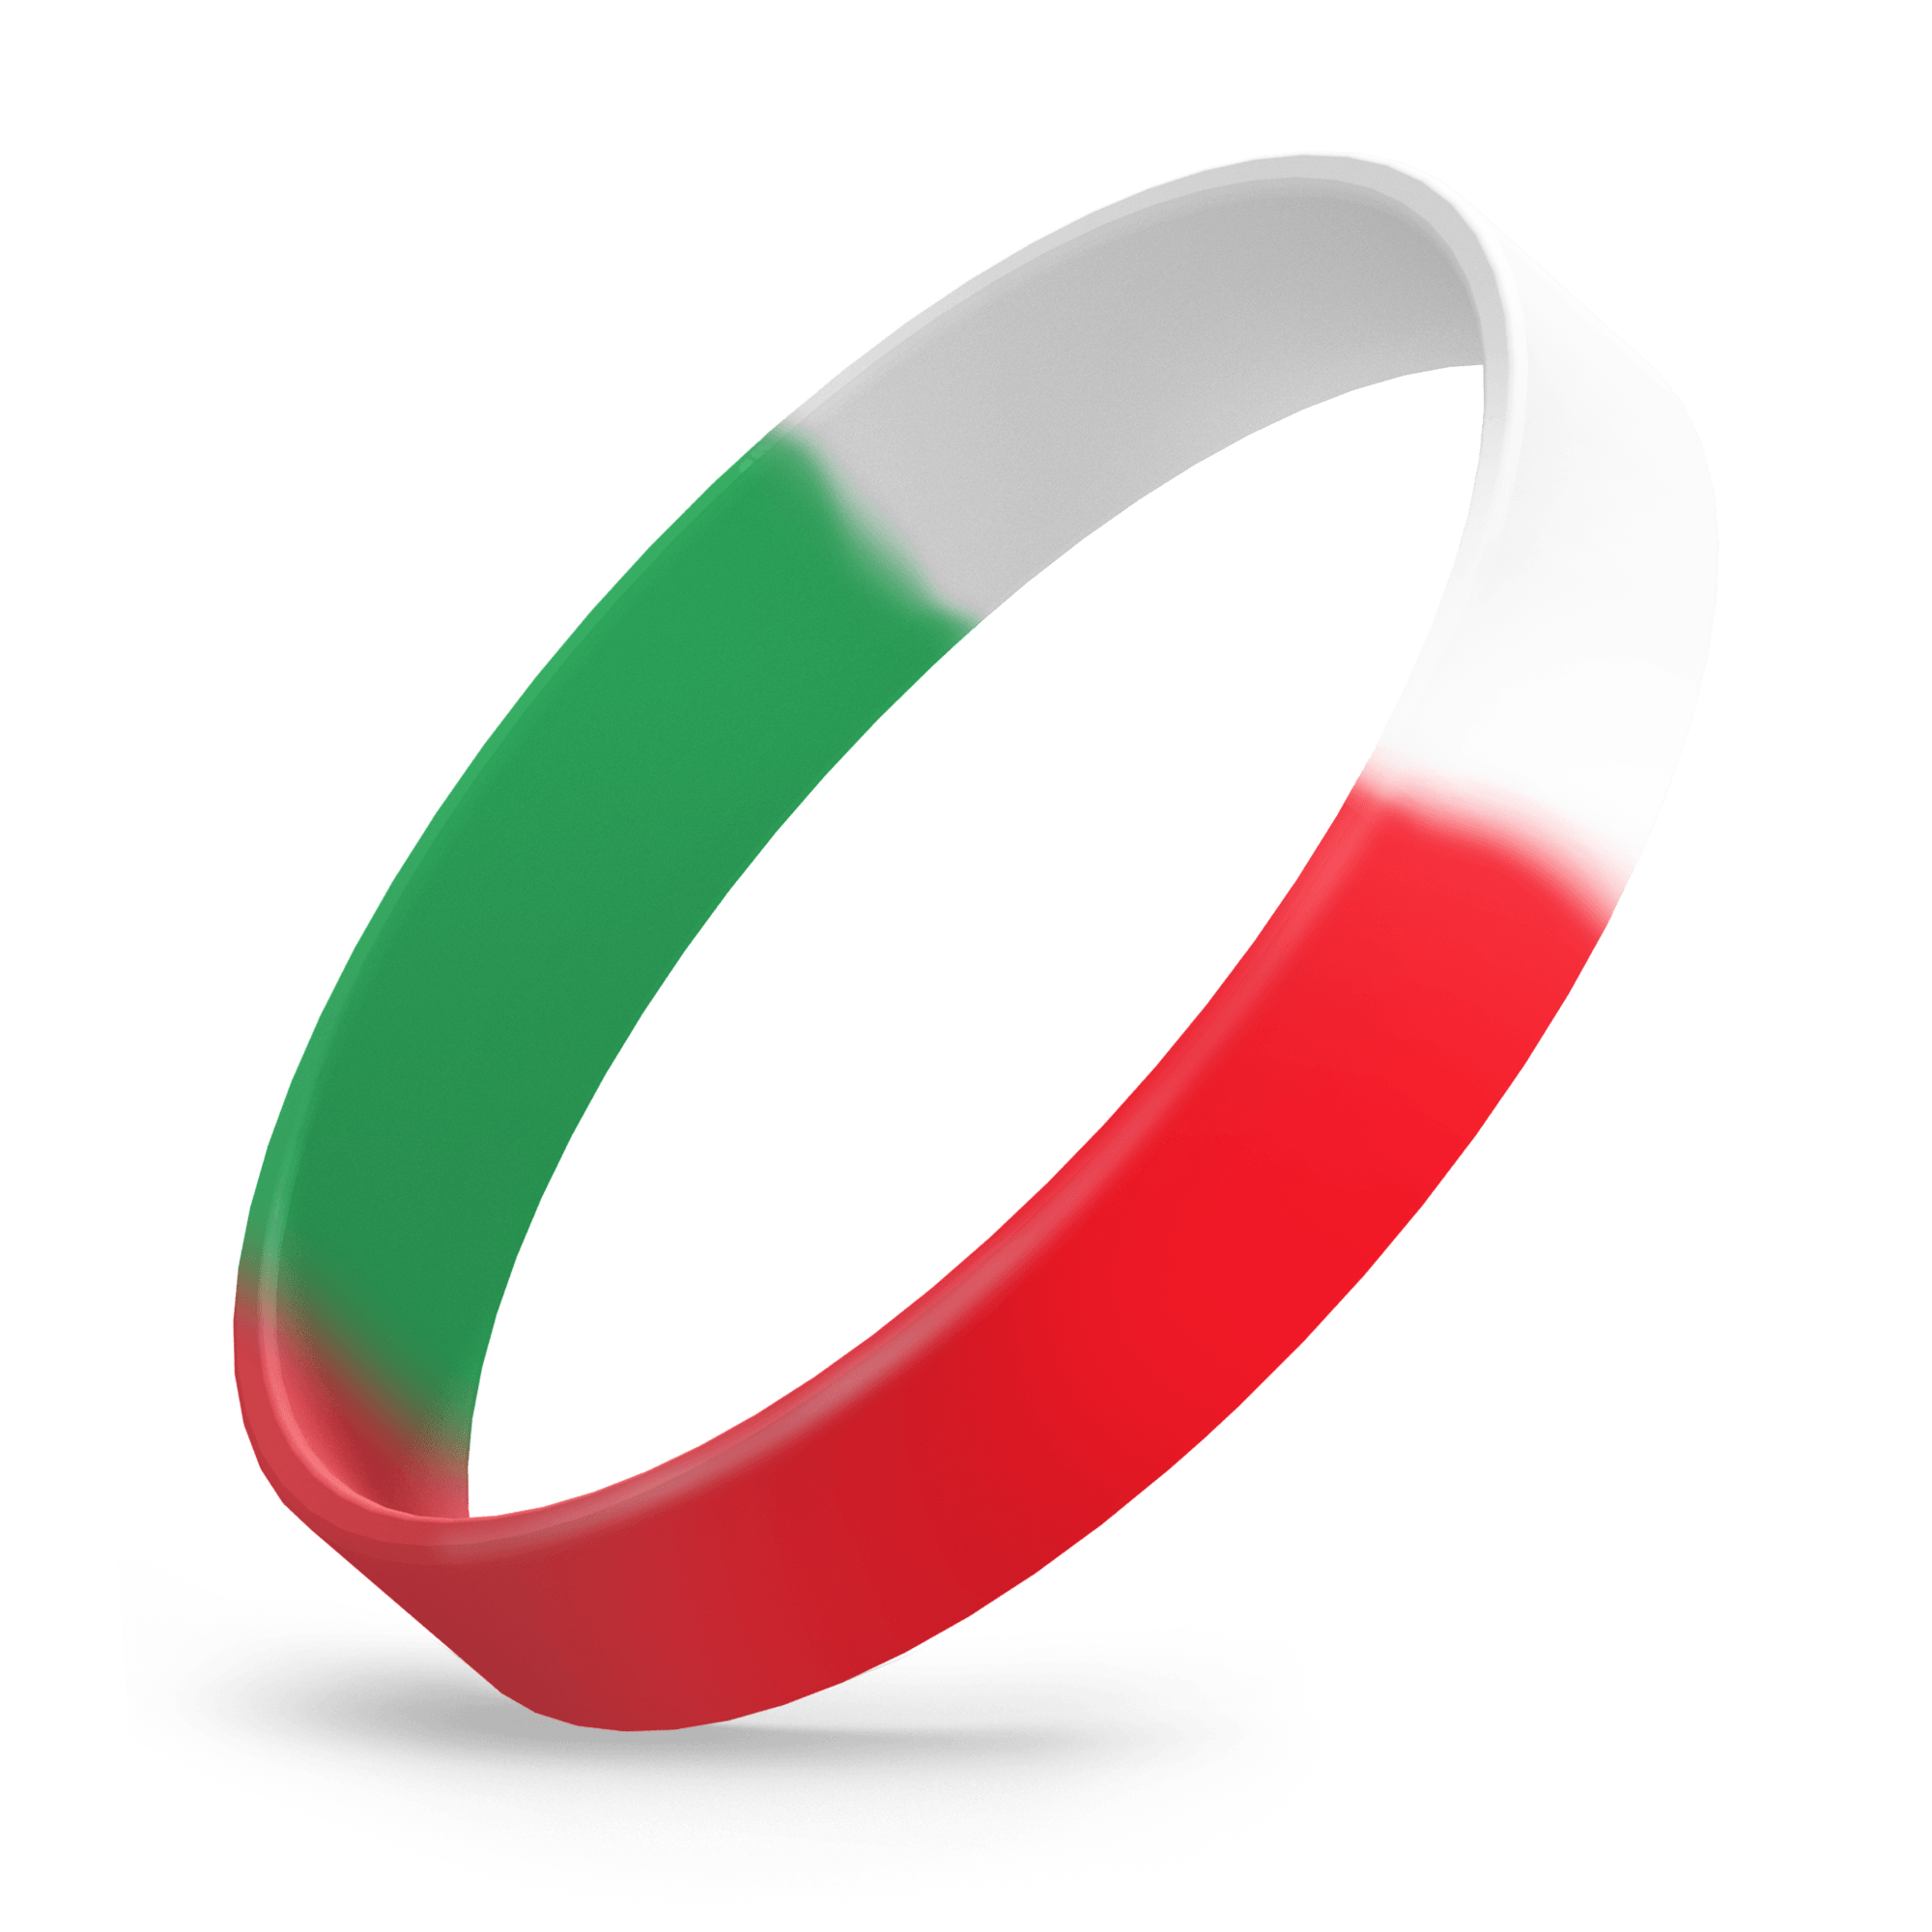 Custom Ink Injected (Red / White / Green Segmented) Silicone Wristbands - Rubber Bracelets